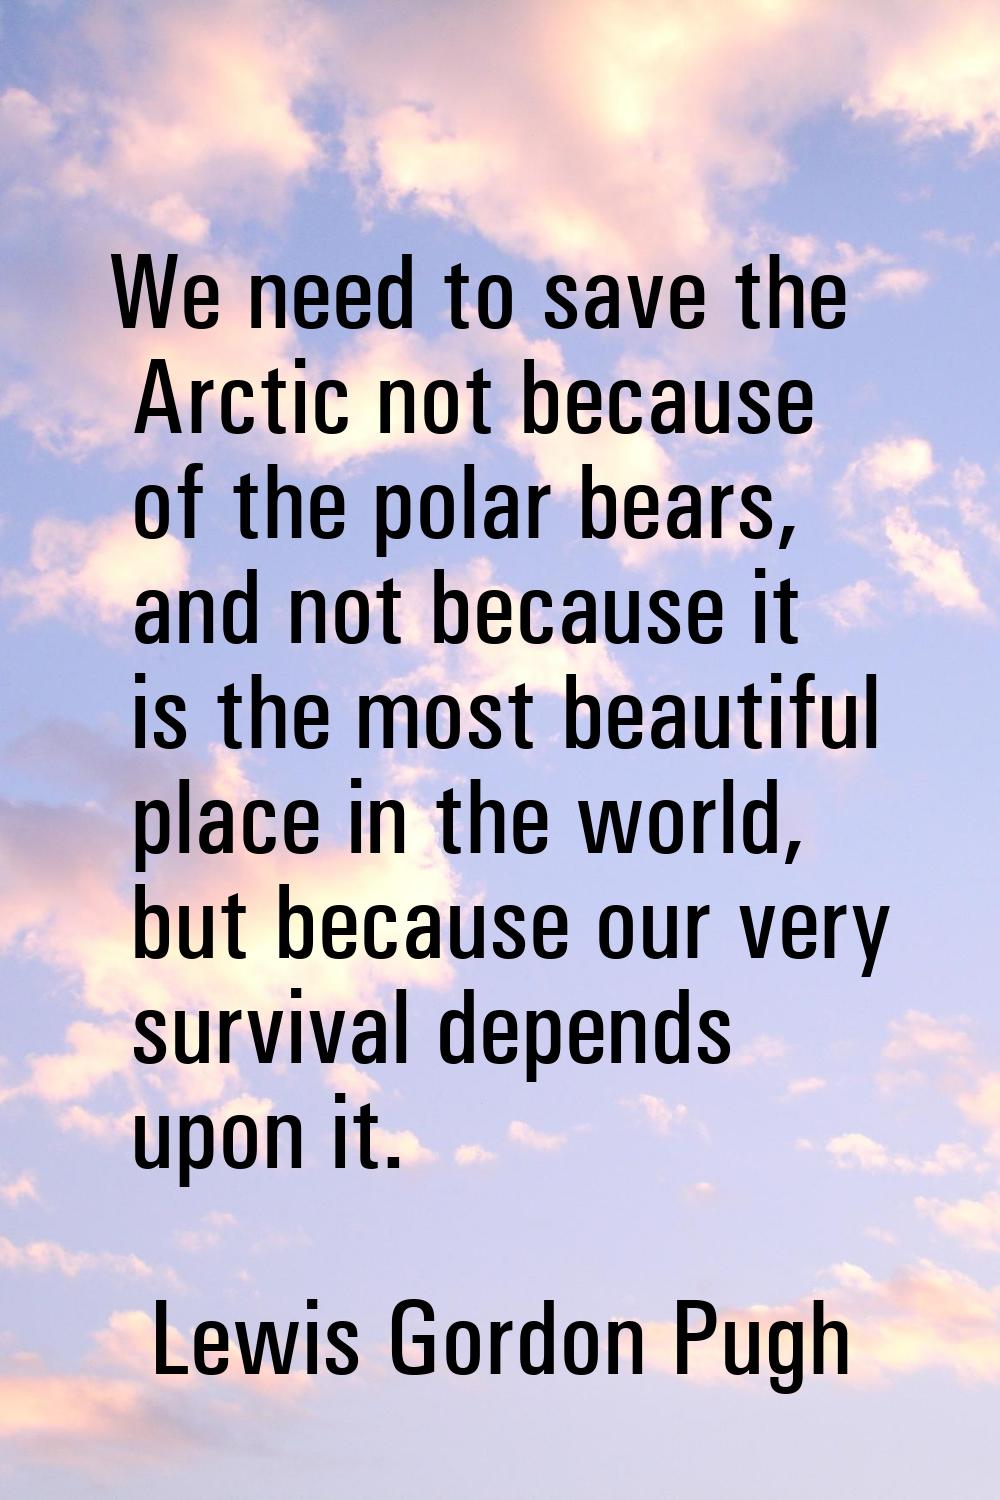 We need to save the Arctic not because of the polar bears, and not because it is the most beautiful